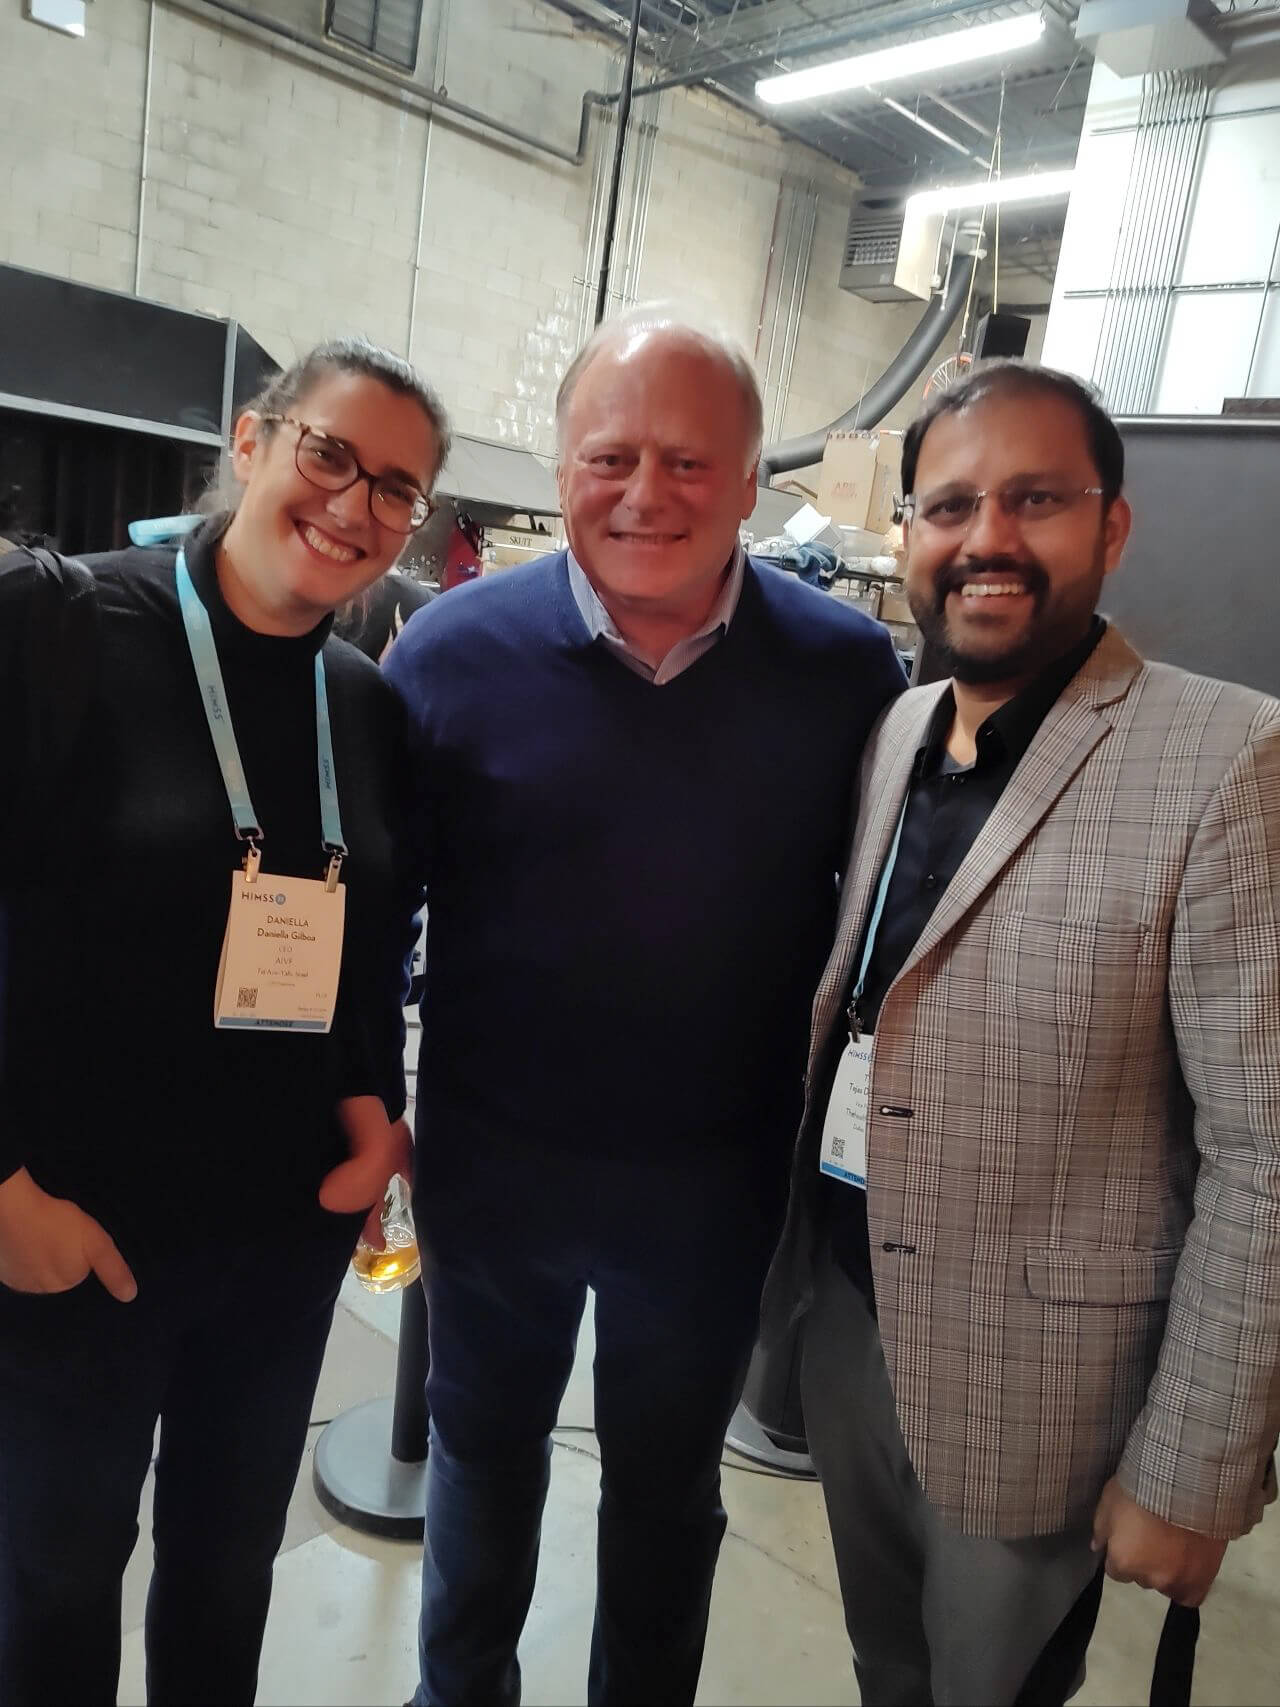 TheHealthcare360 at HIMSS 2023 event in McCormick Place Convention Center, Chicago, IL, USA - #Tejas Deshmukh, #clair360 #HIMSS2023 #Hal Wolf #Daniella Gilboa